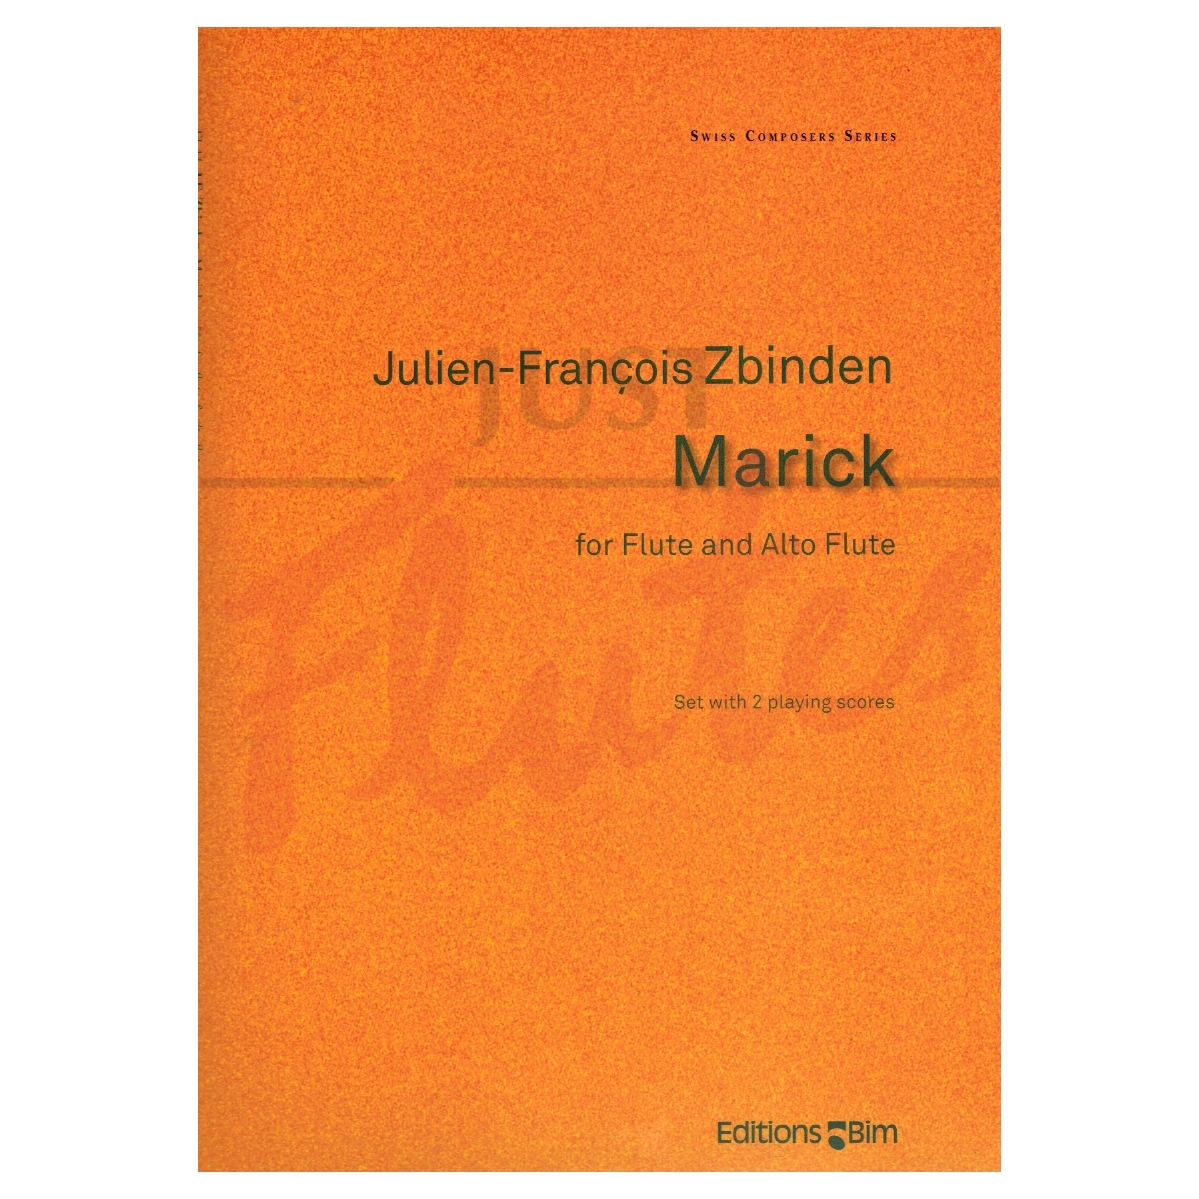 Marick for Flute and Alto Flute